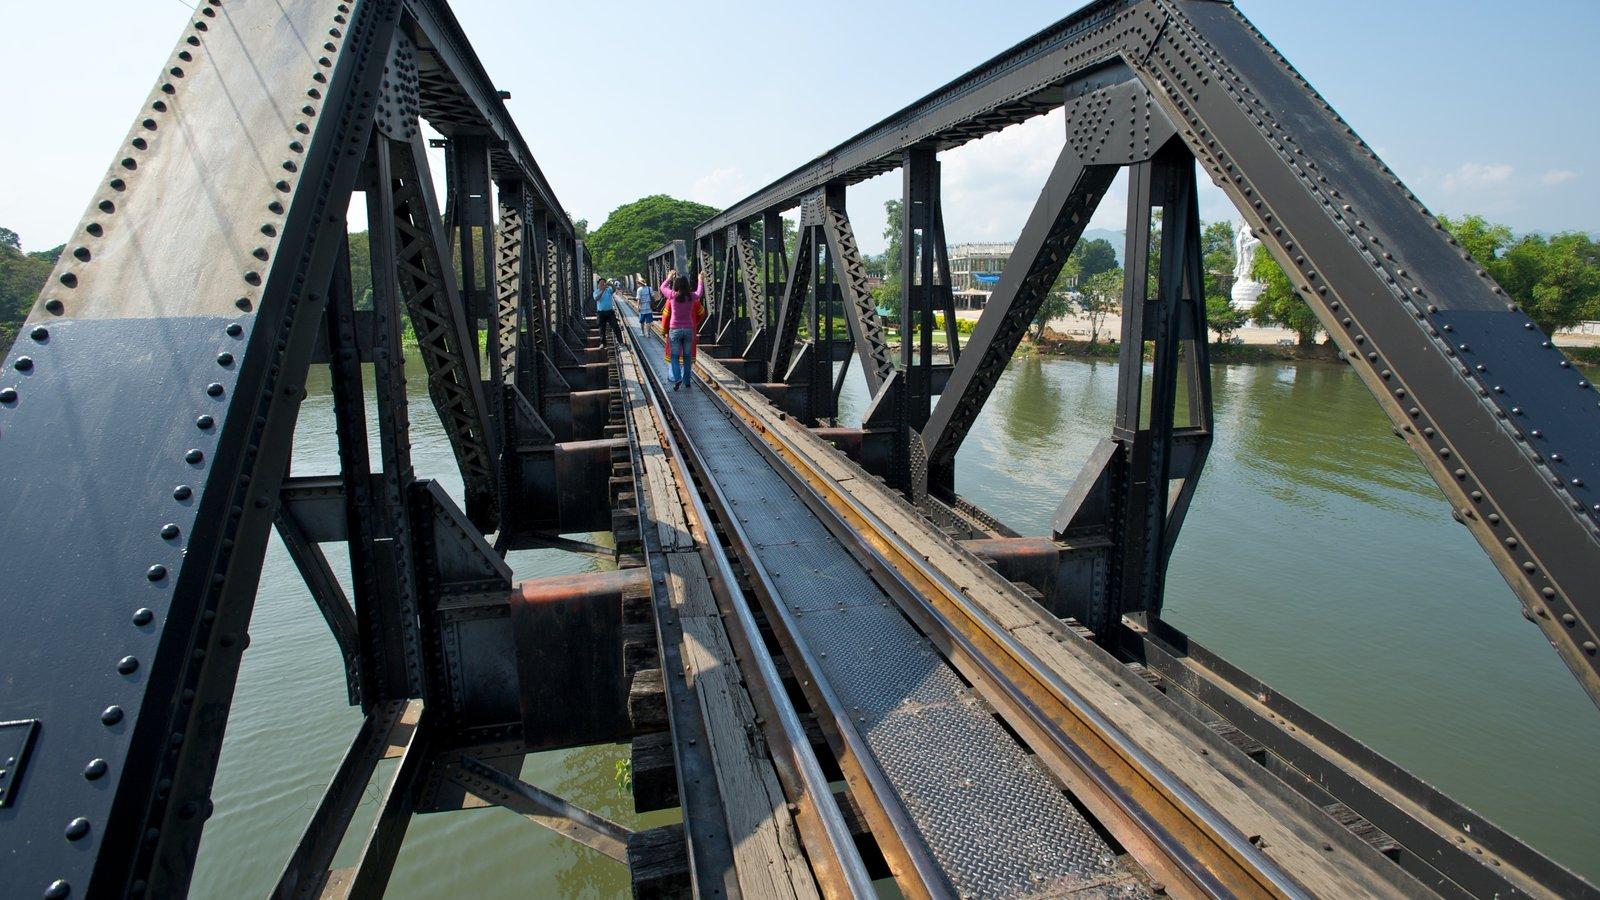 Bridge Over the River Kwai picture: View photo and image